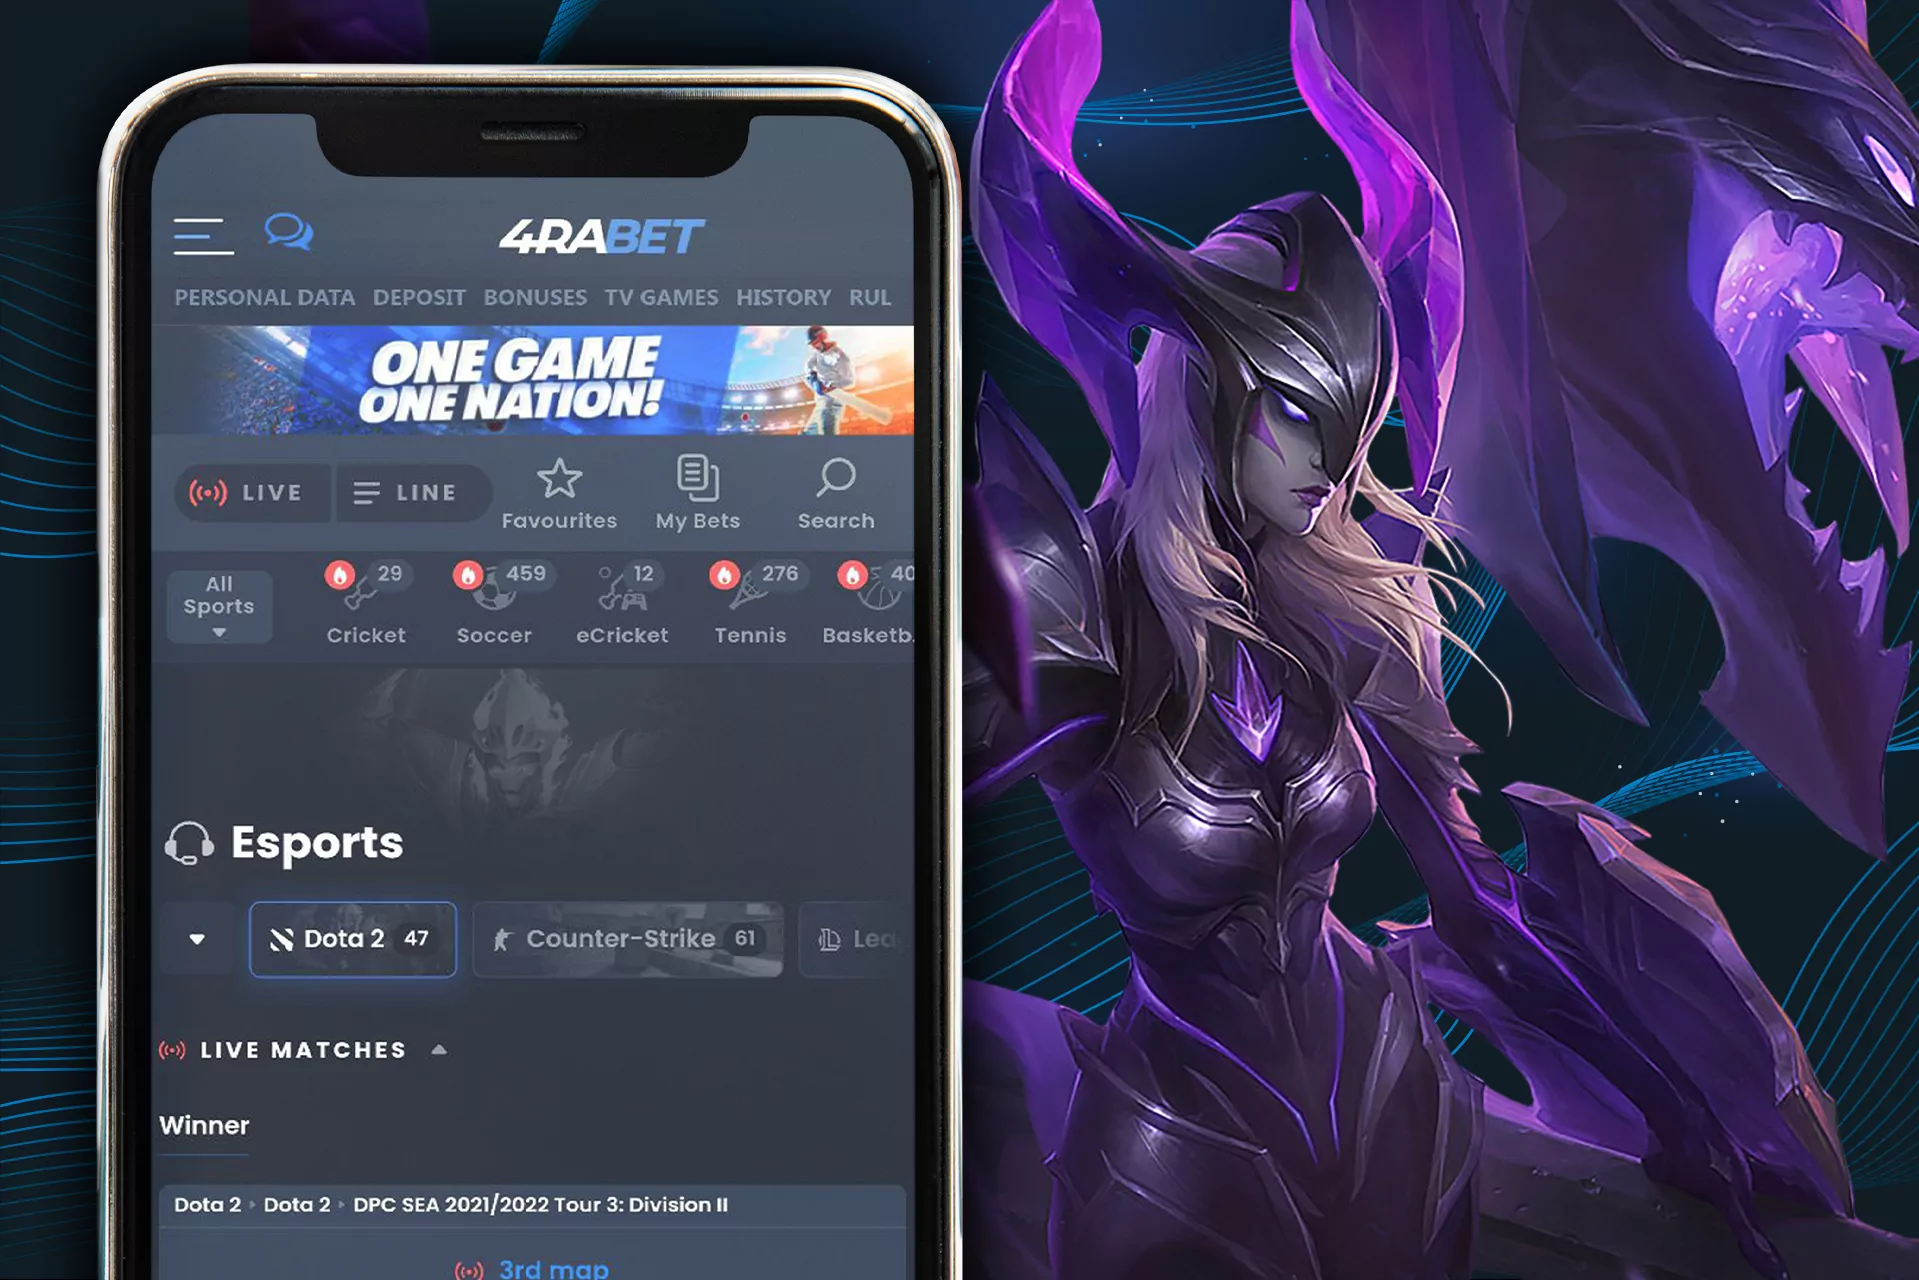 There is a separate section with live matches, where you can follow the game of any team and make live bets on esports.